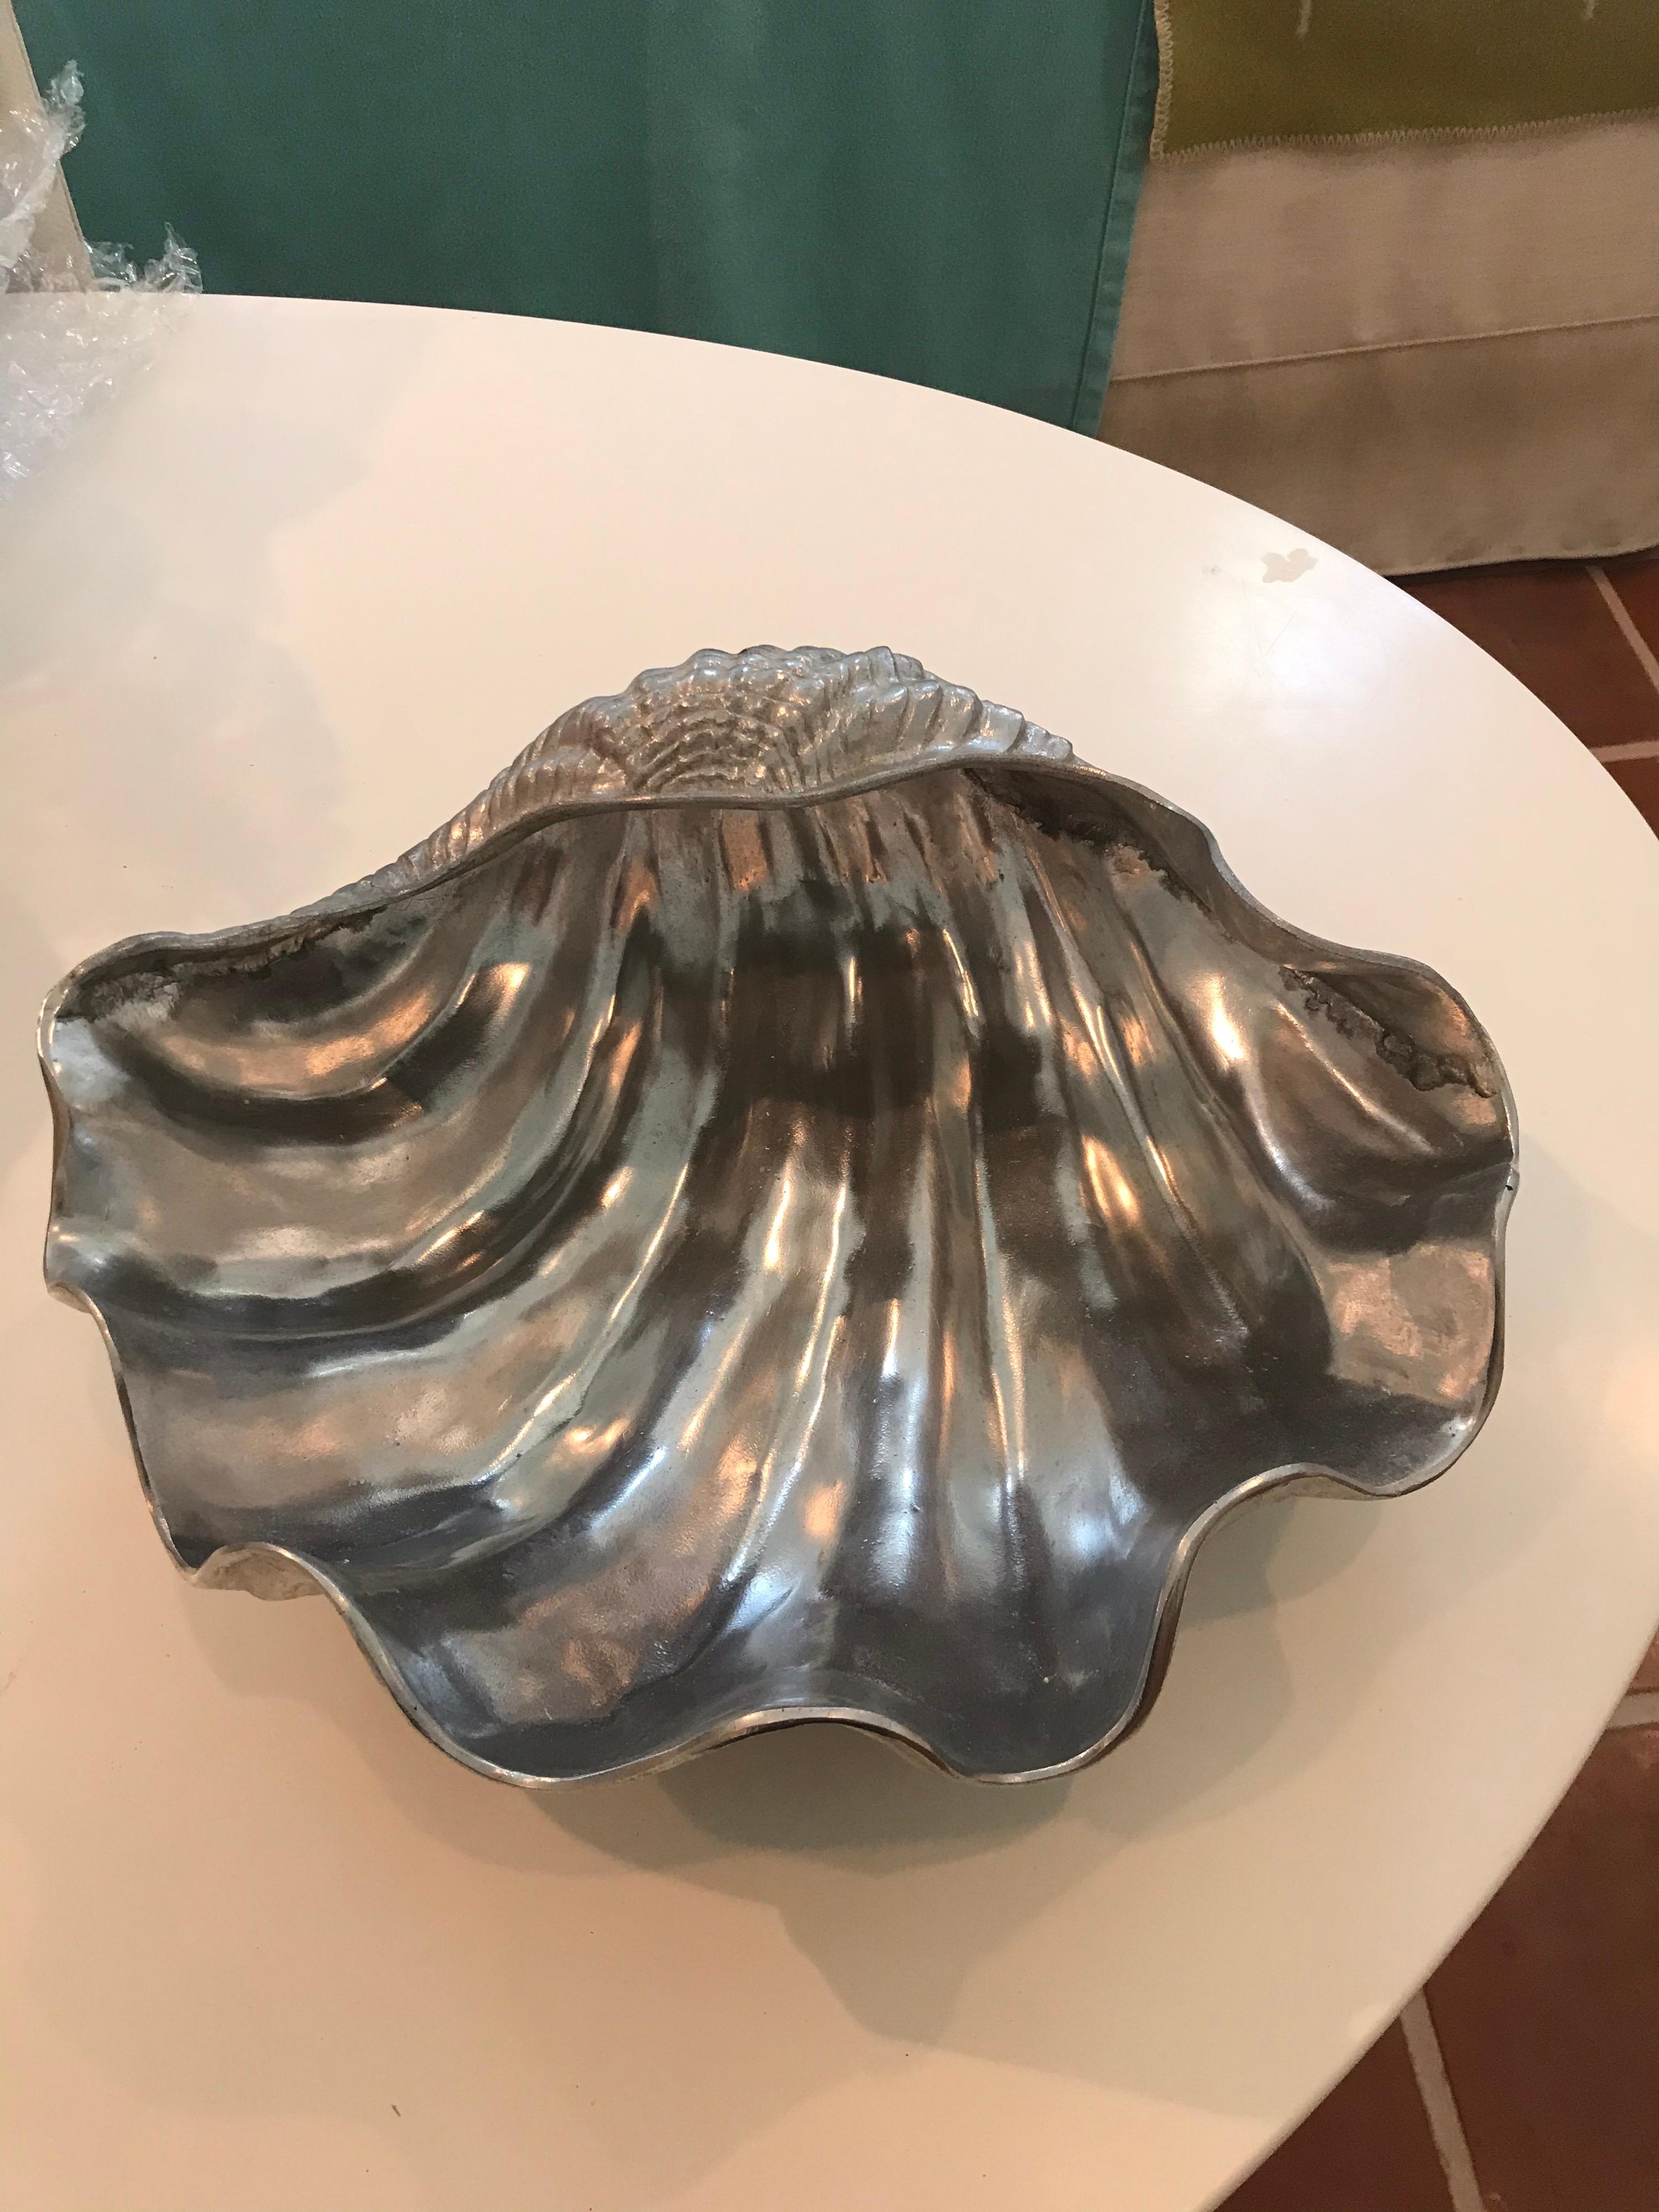 This is a 1988 Arthur Court clam shell it is made out of aluminum and is used as decorative or a serving piece.